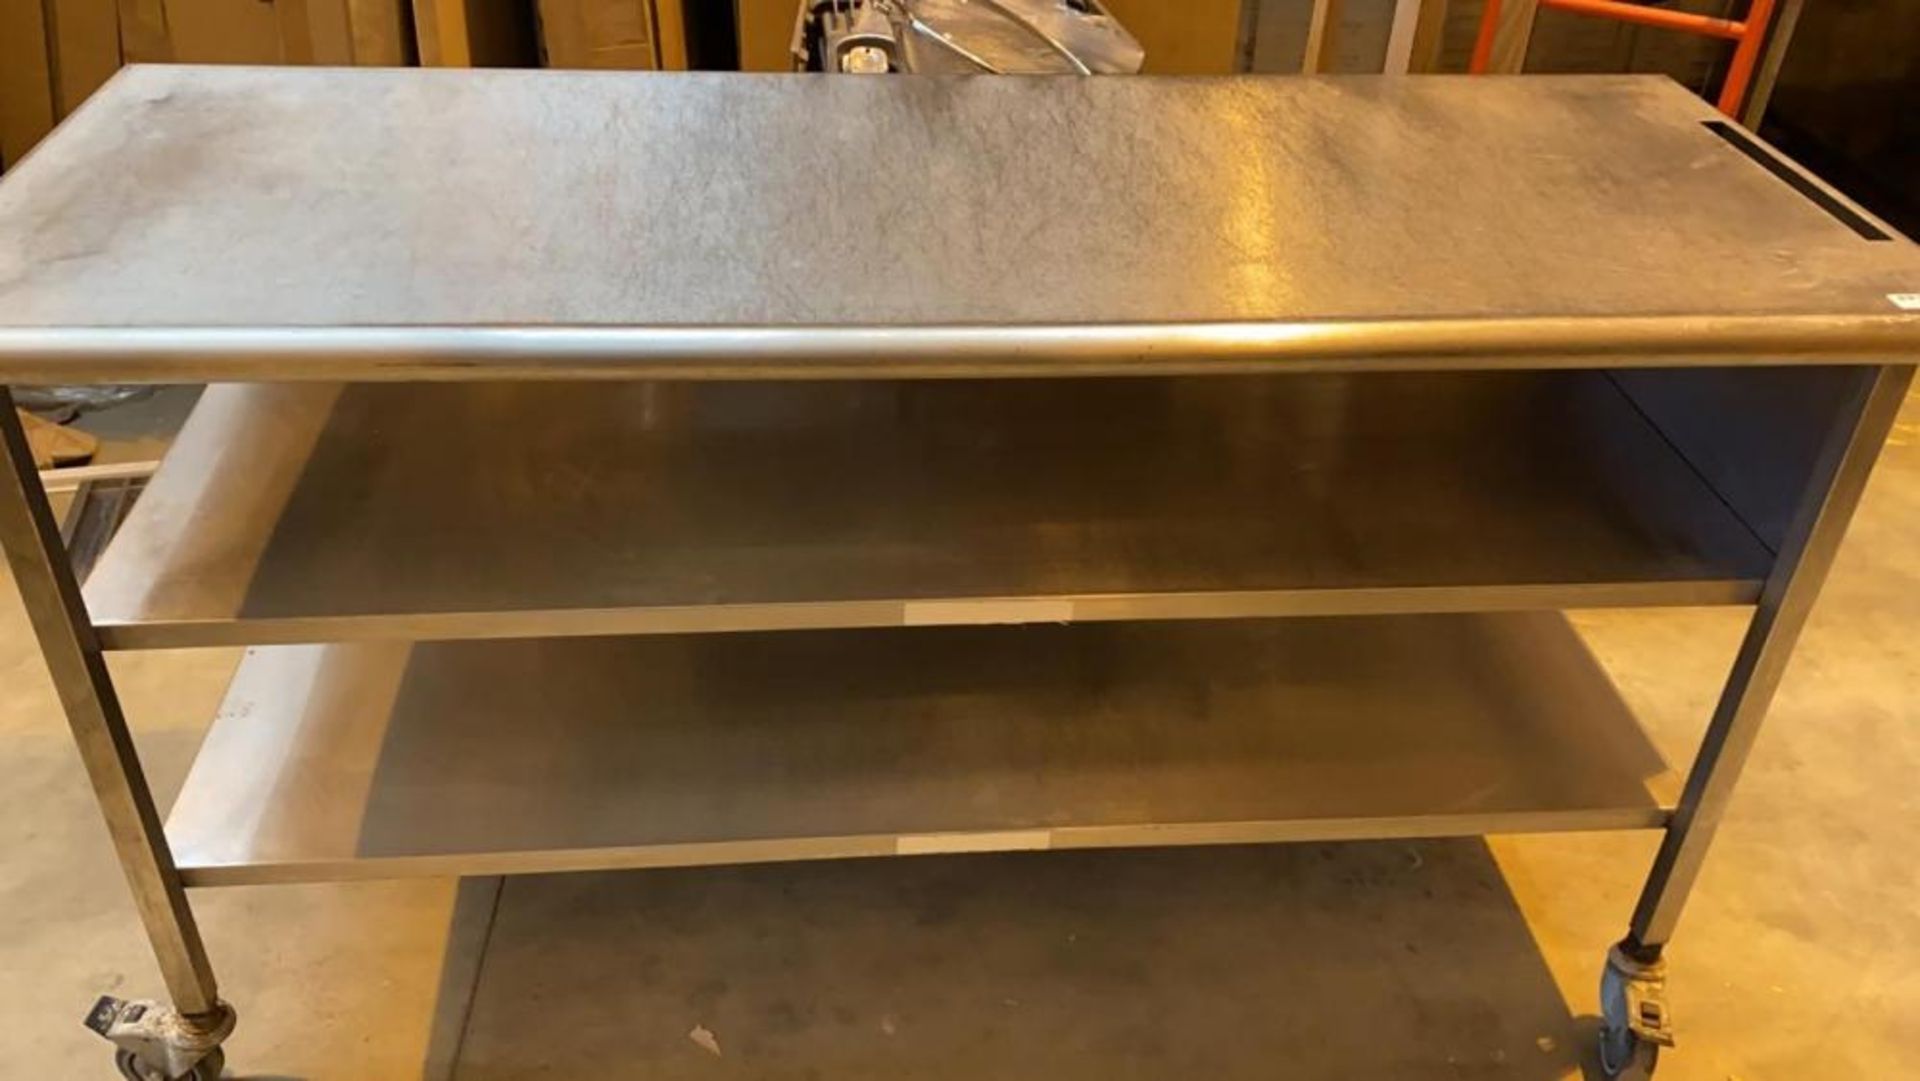 1 x Long Stainless Steel Commercial Kitchen Prep Table on Casters With 2 Undershelves - Dimensions: